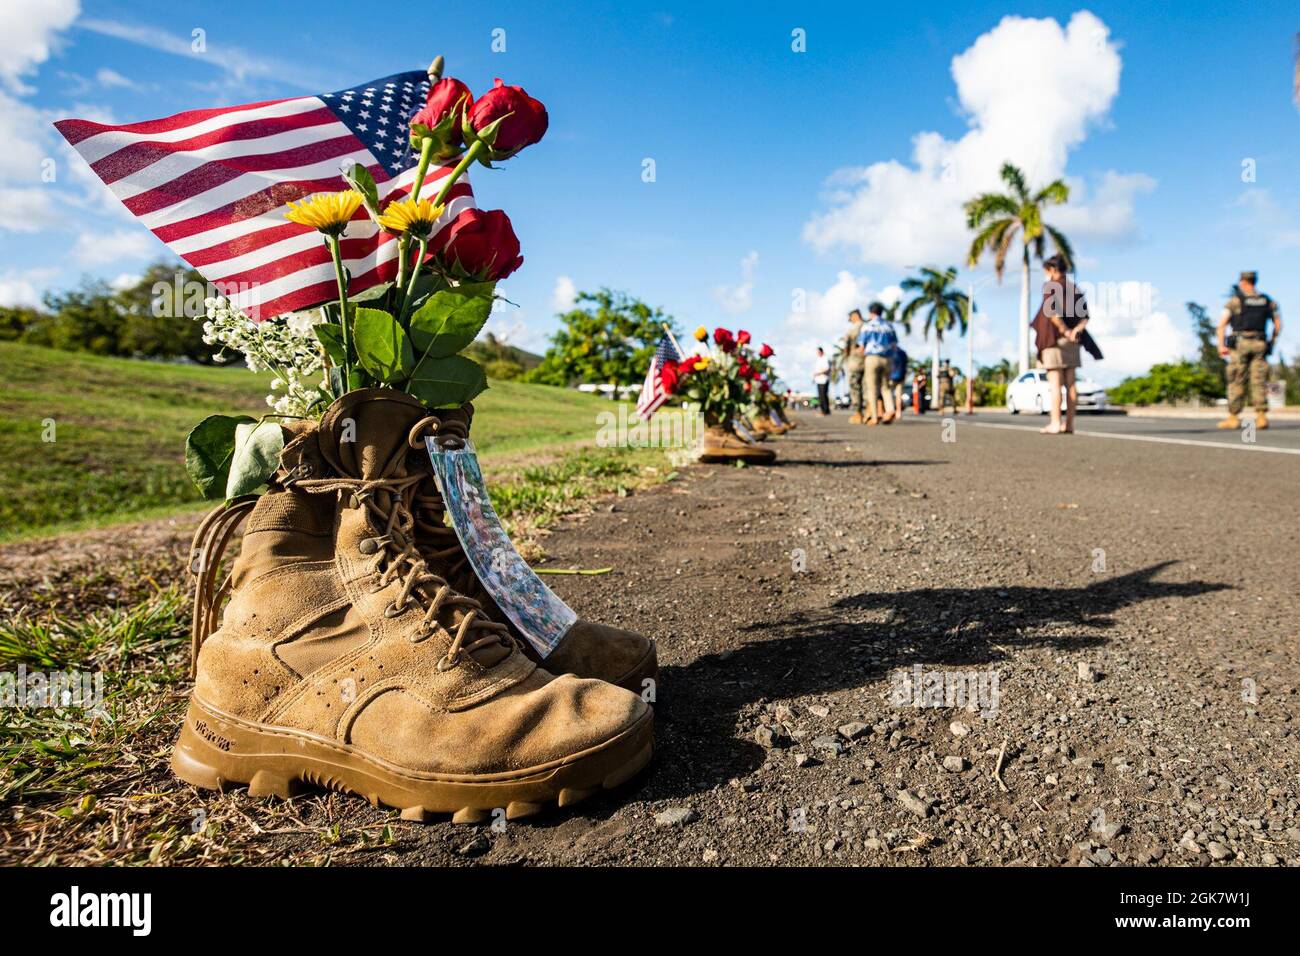 A pair of boots is displayed as part of a memorial aboard Marine Corps Base Hawaii, Aug. 29, 2021, in remembrance of the 13 service members recently killed in Afghanistan. The memorial, comprised of community donations, was displayed at the entrance of MCBH. Stock Photo